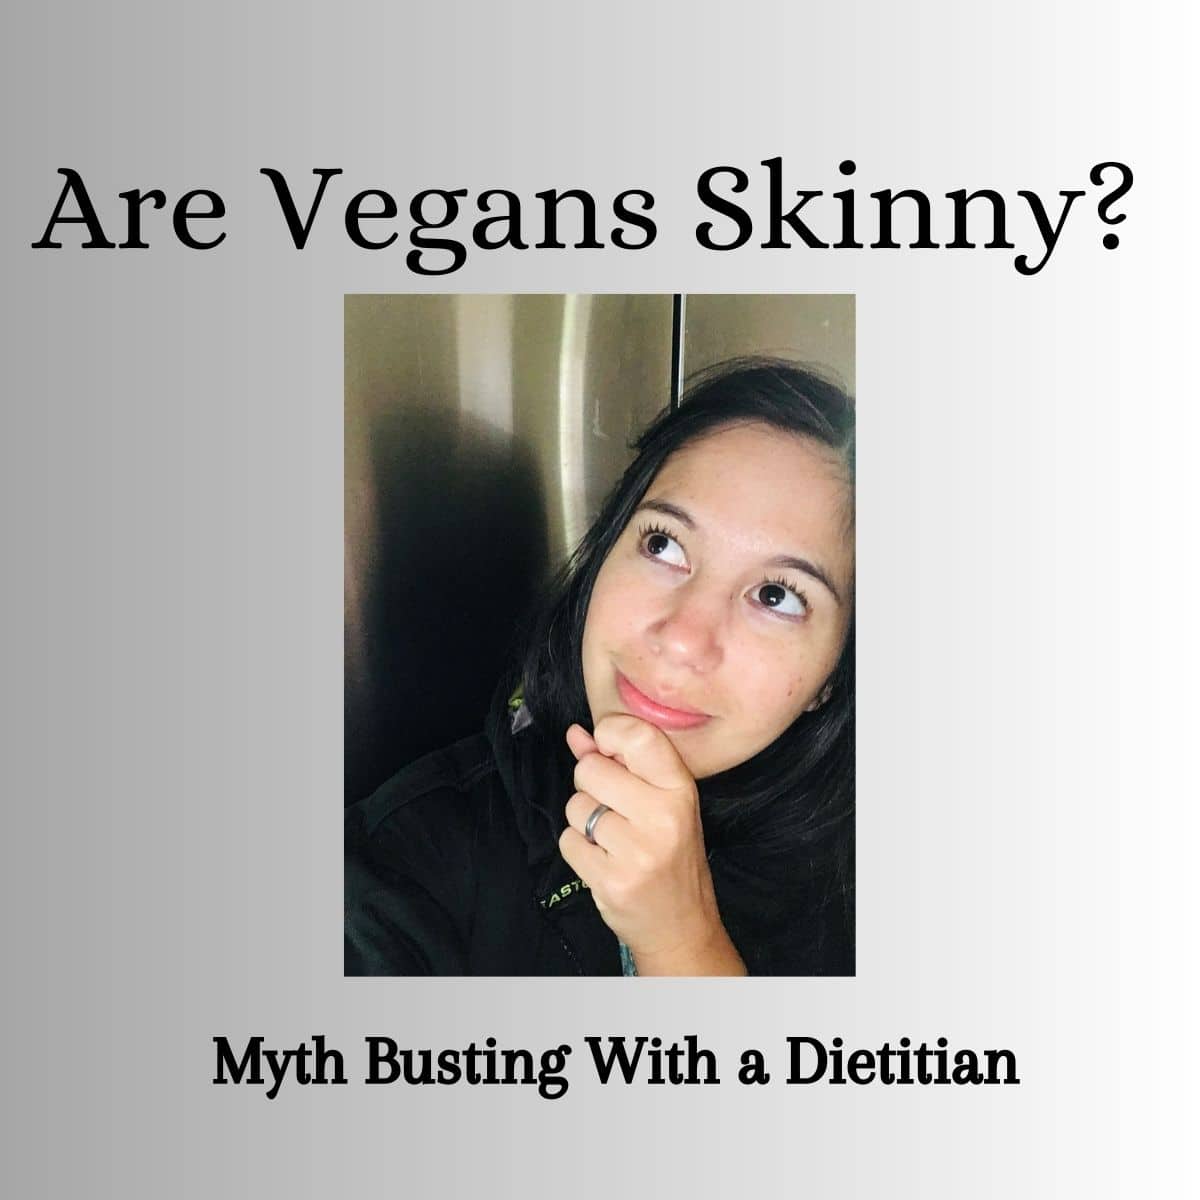 Picture of Christine looking up where text reads: Are Vegans Skinny? Text below reads Myth Busting with a Dietitian.